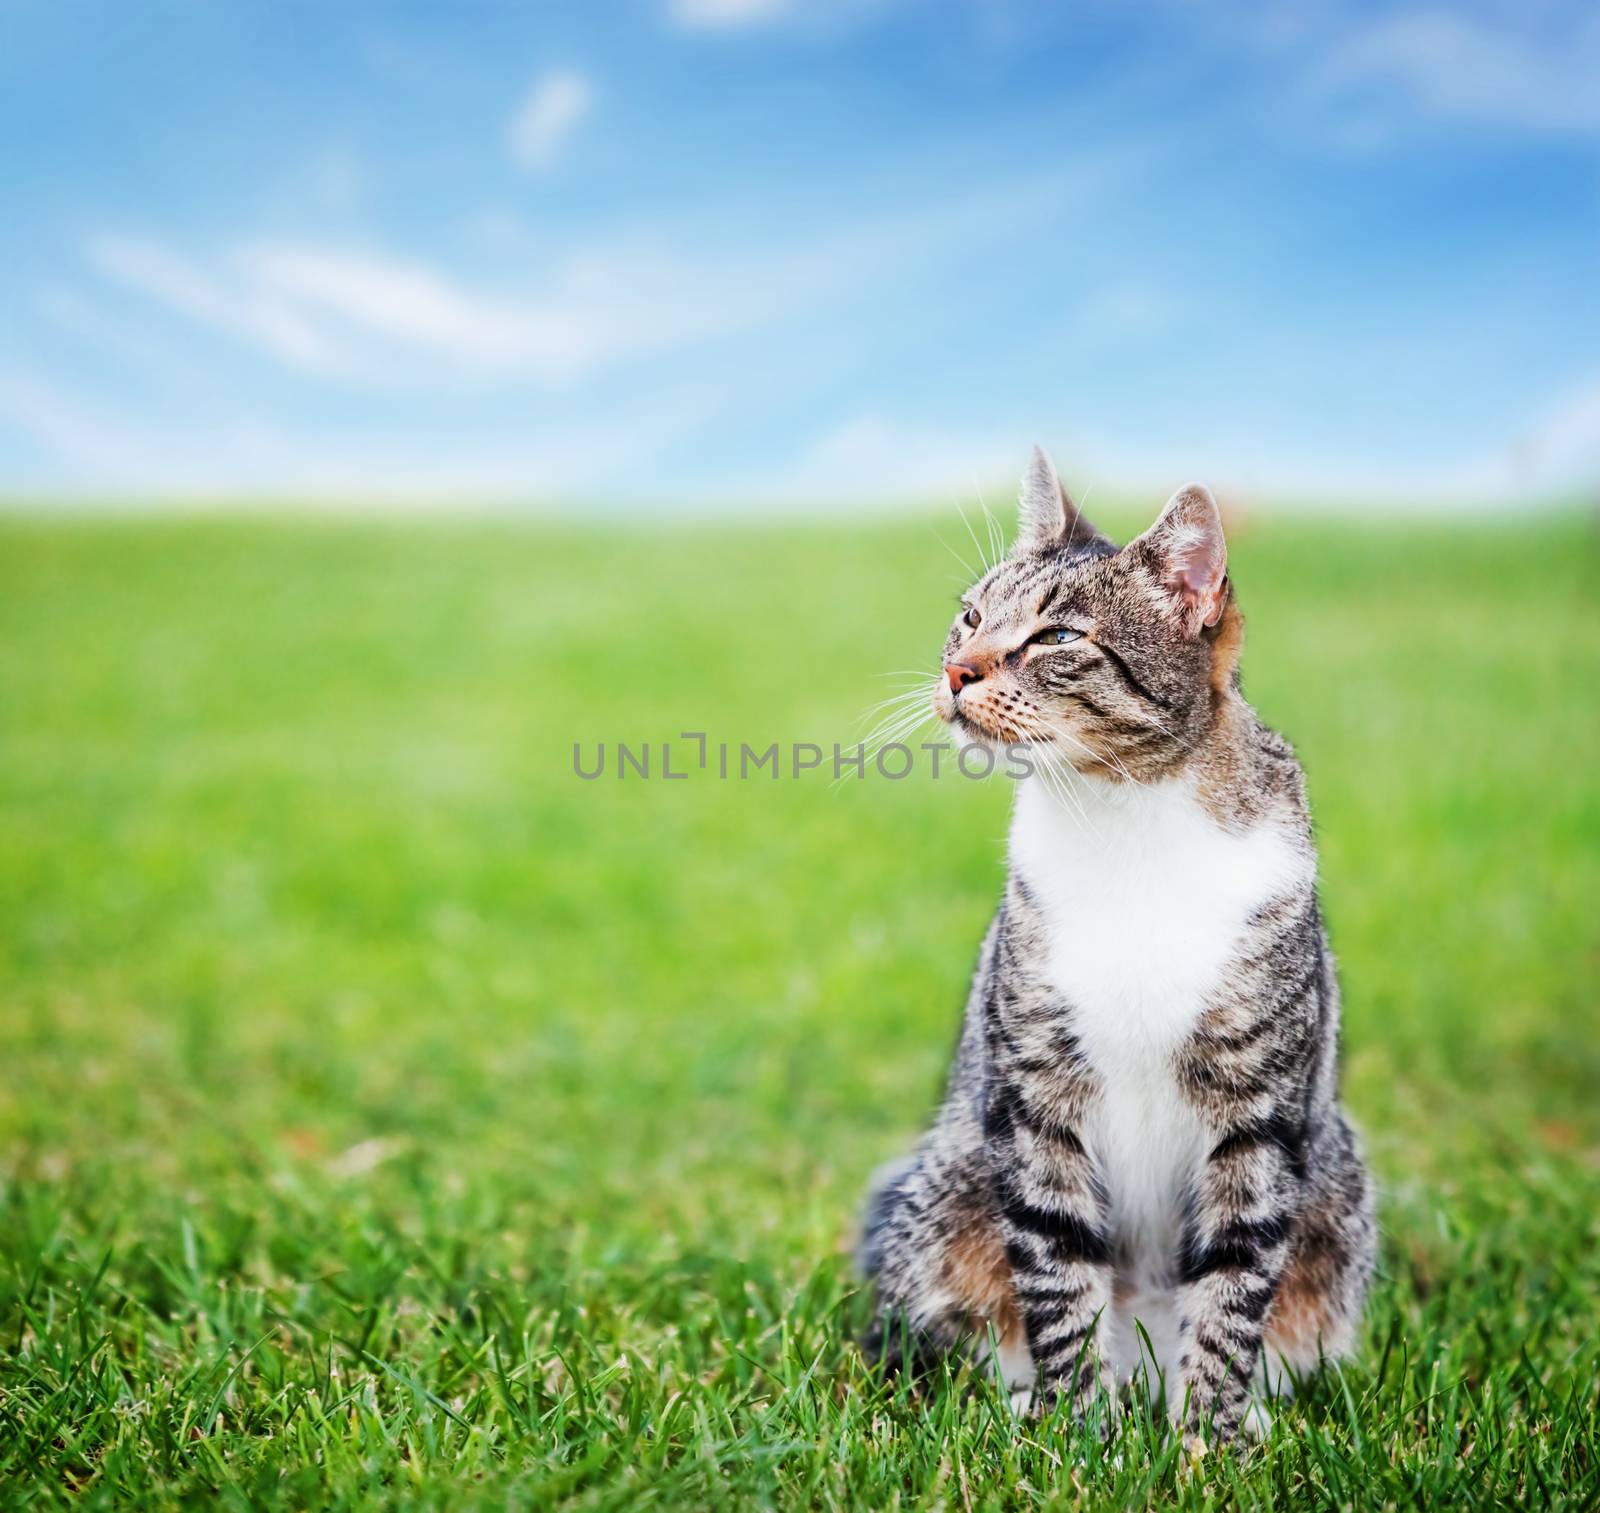 Cute cat sitting on green spring grass on sunny day. Colorful, vibrant composite